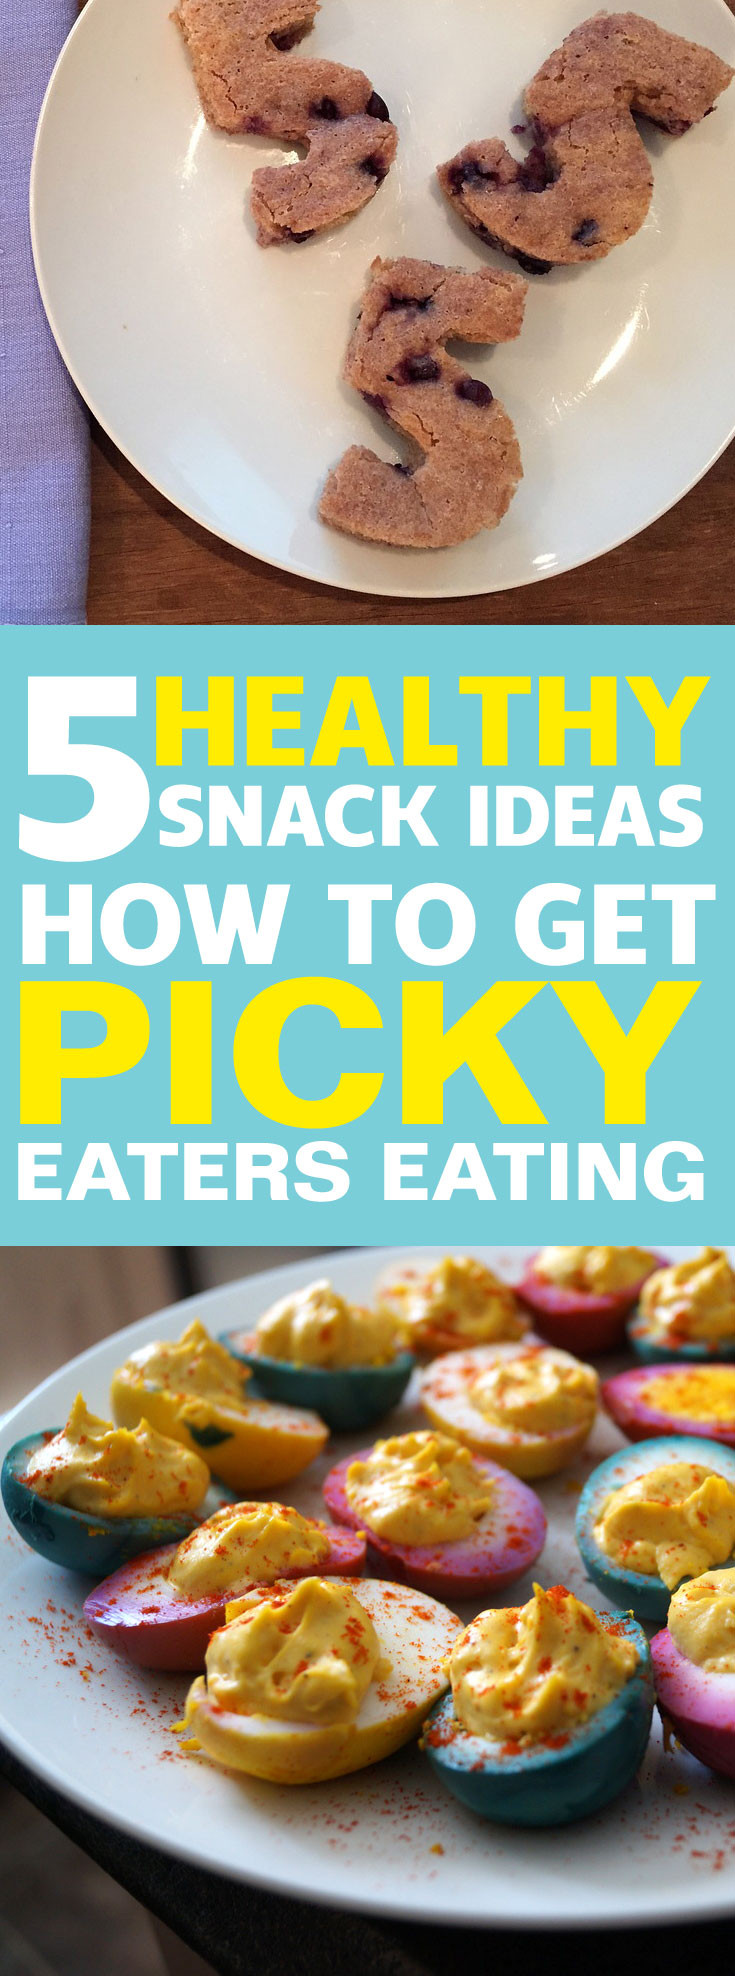 5 Healthy Snacks
 5 Healthy Snacks for Kids How To Get Picky Eaters Eating